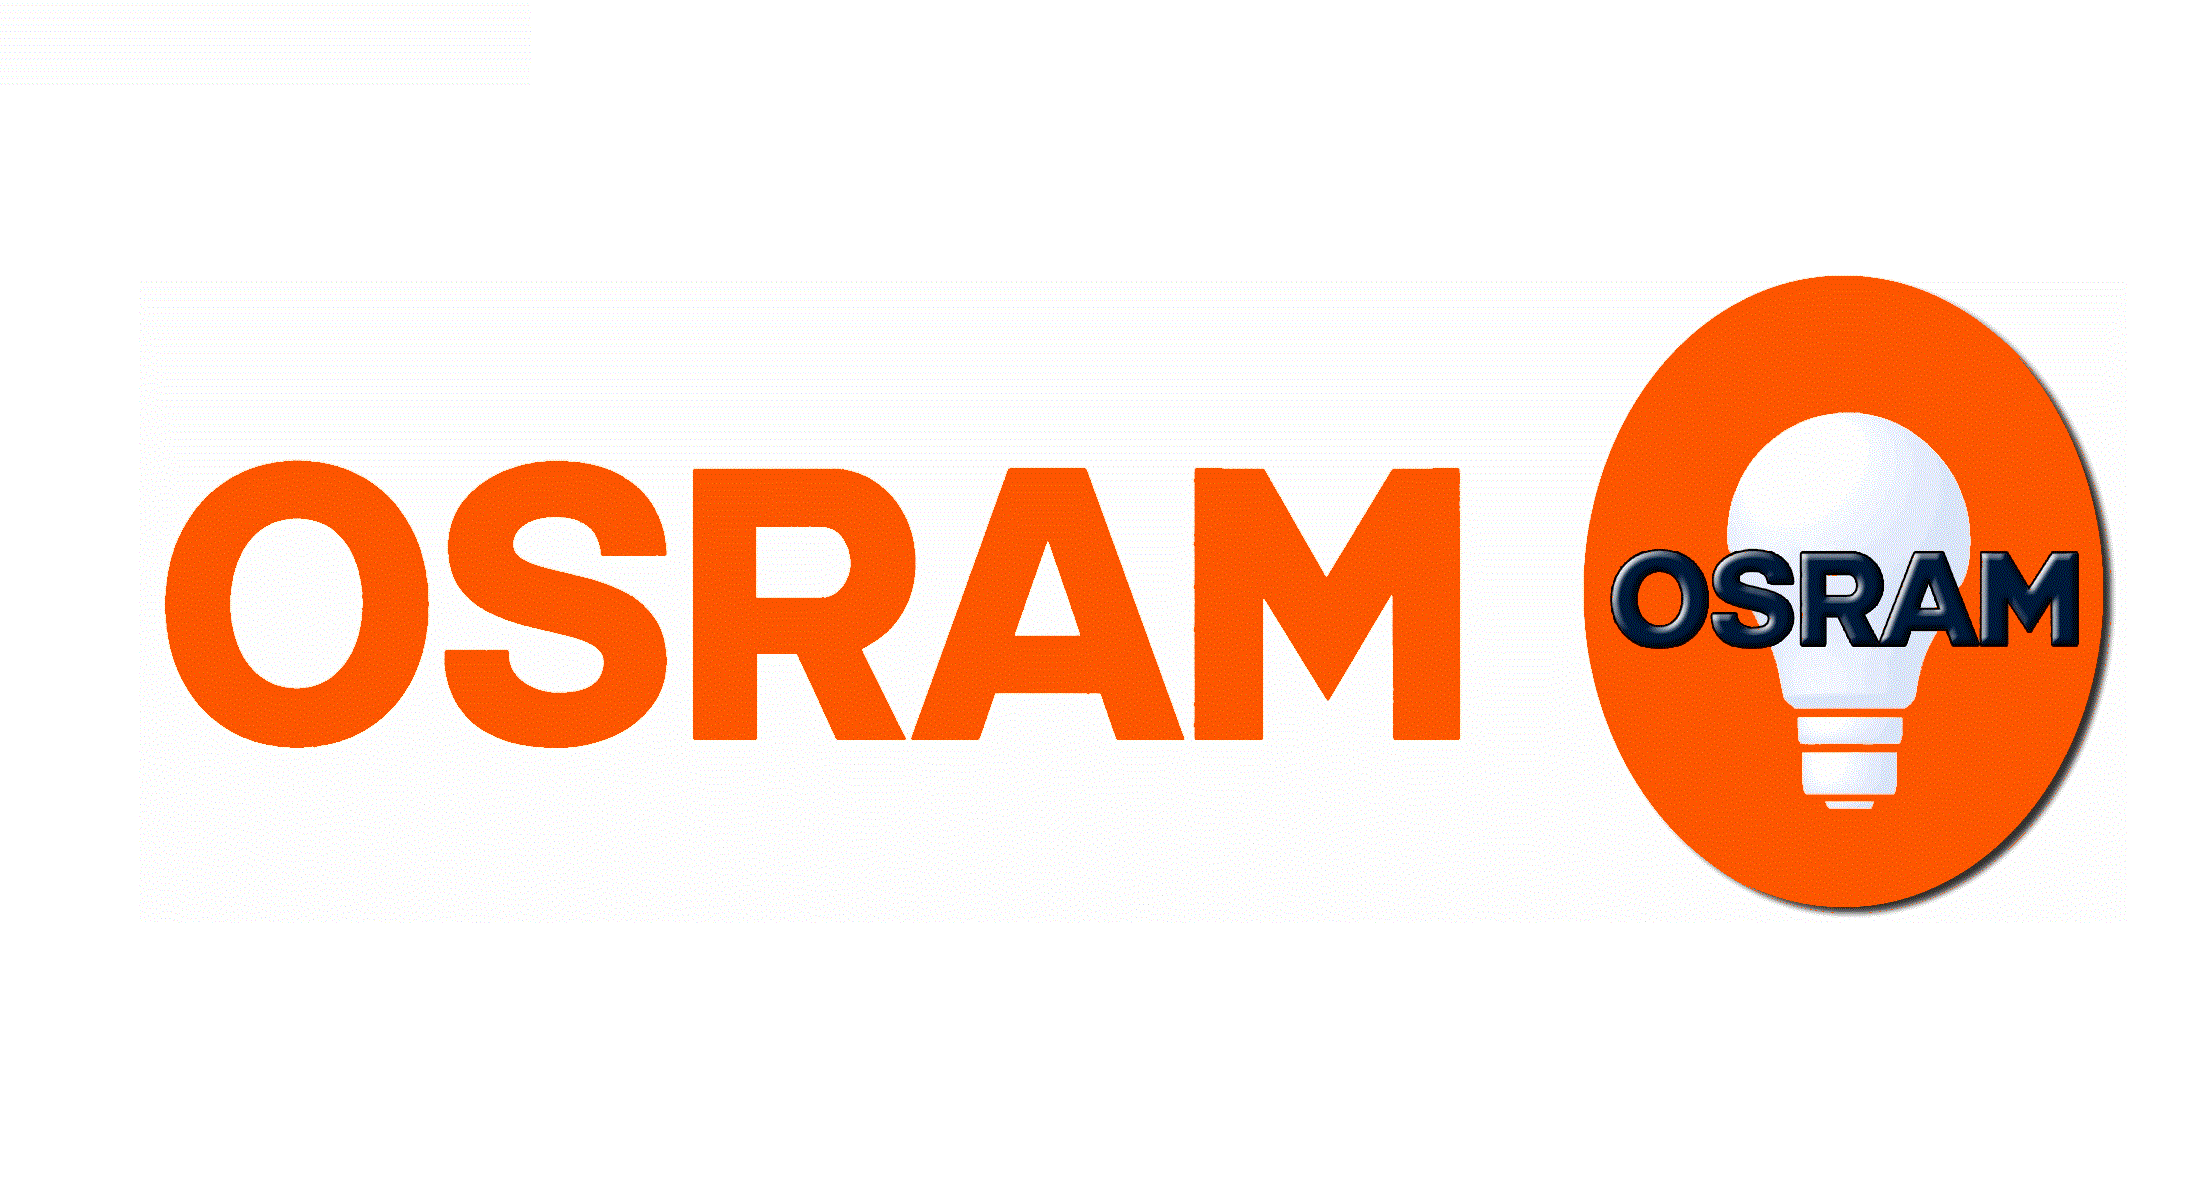 More about OSRAM